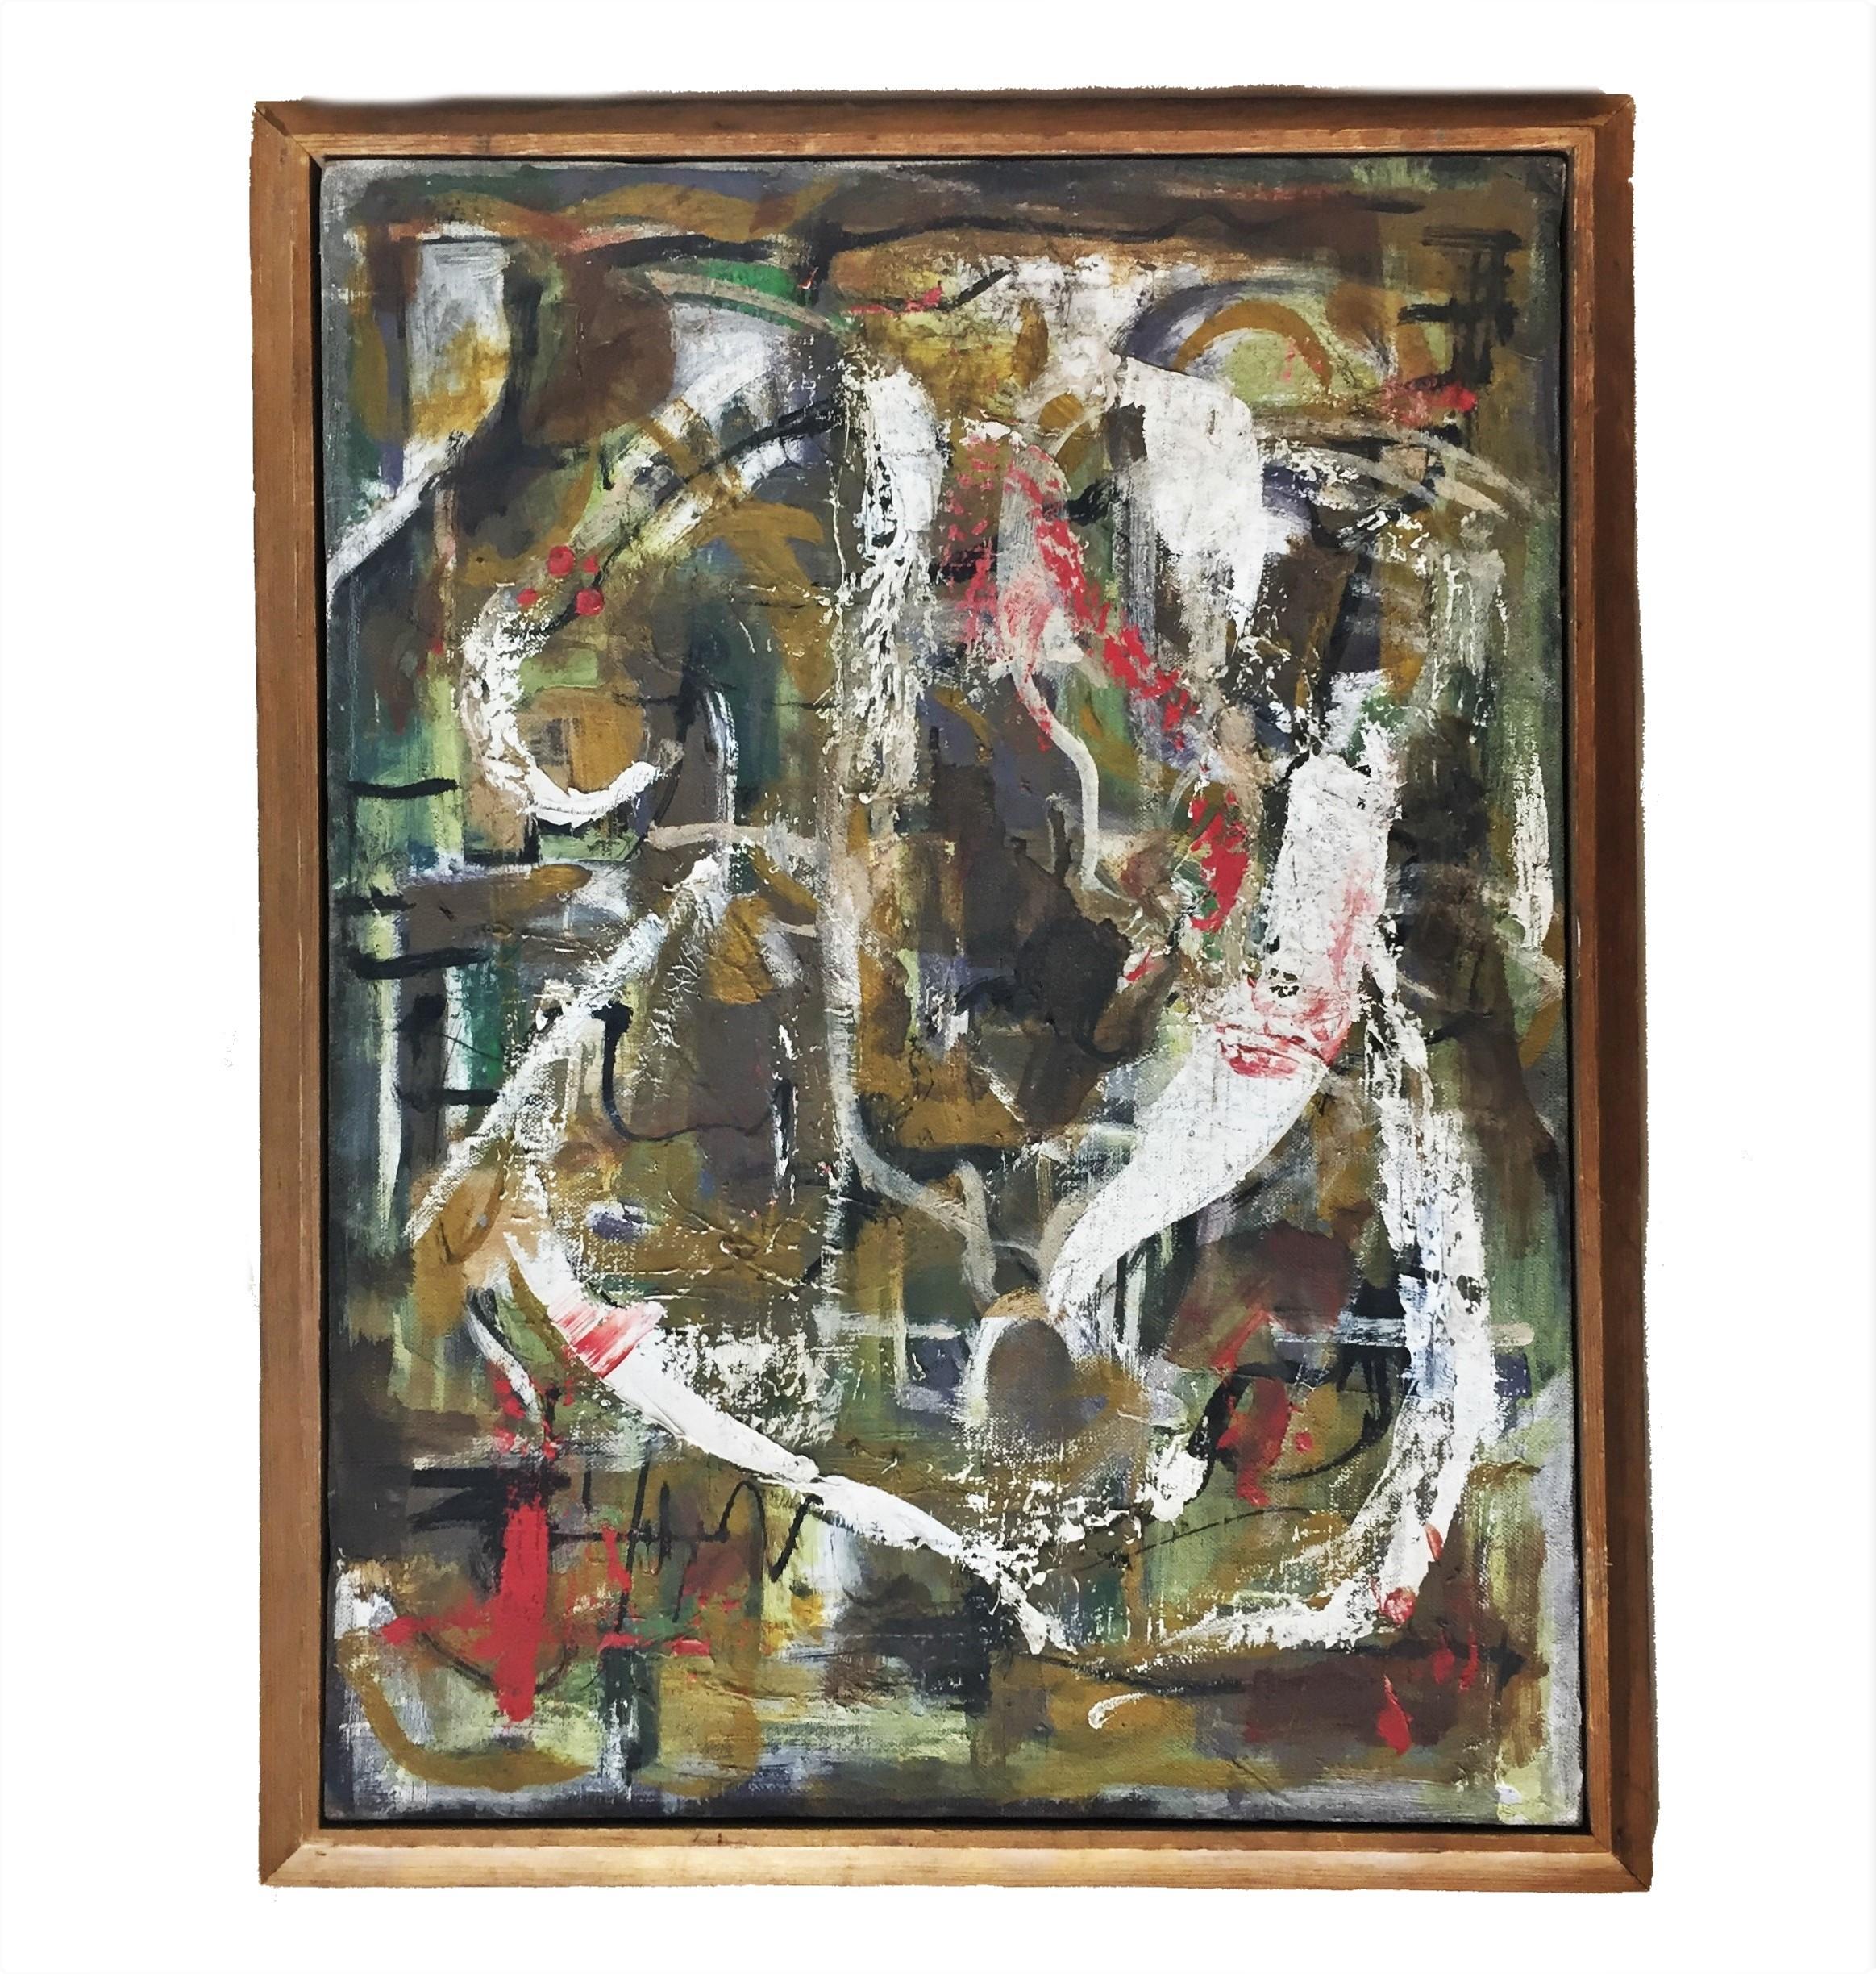 Signed in the lower left corner, and inscribed 'Mikldred Hurwitz' en verso.

Mildred Hurwitz (American, 1922–2012) was a successful Chicago–based abstract artist. She was born in Philadelphia, where she received a BA from The University of the